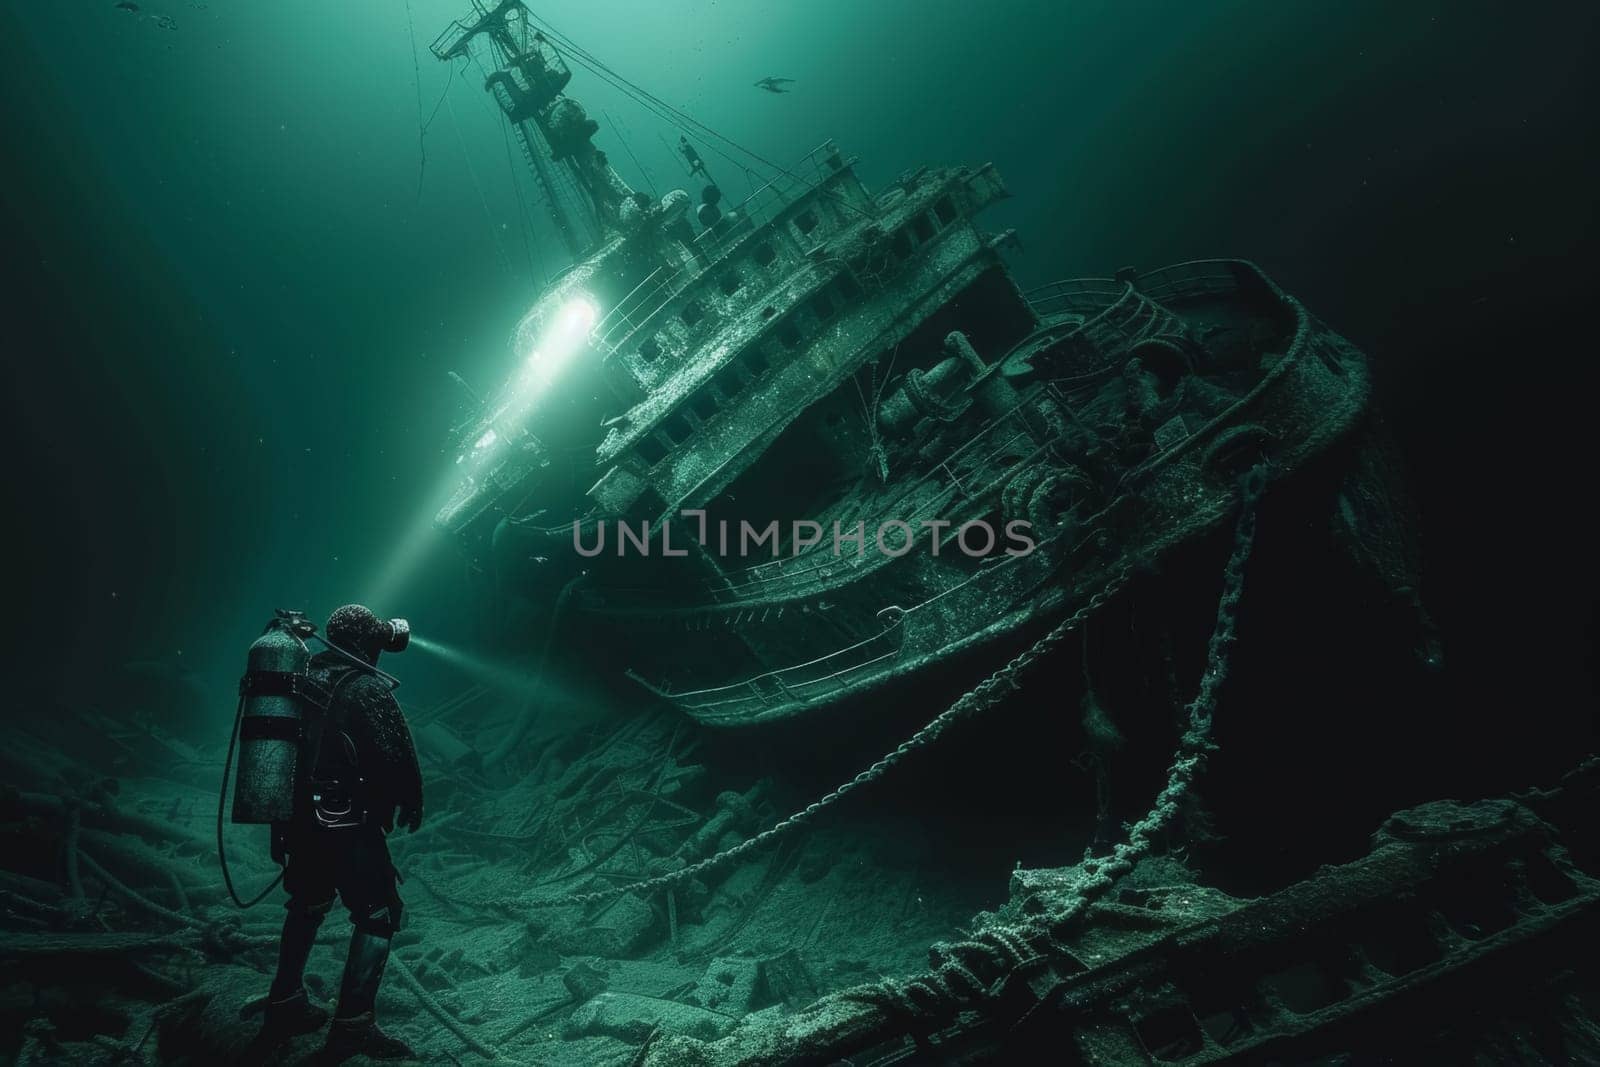 A diver with a flashlight explores the haunting depths of the ocean, casting light on the eerie remains of a sunken shipwreck